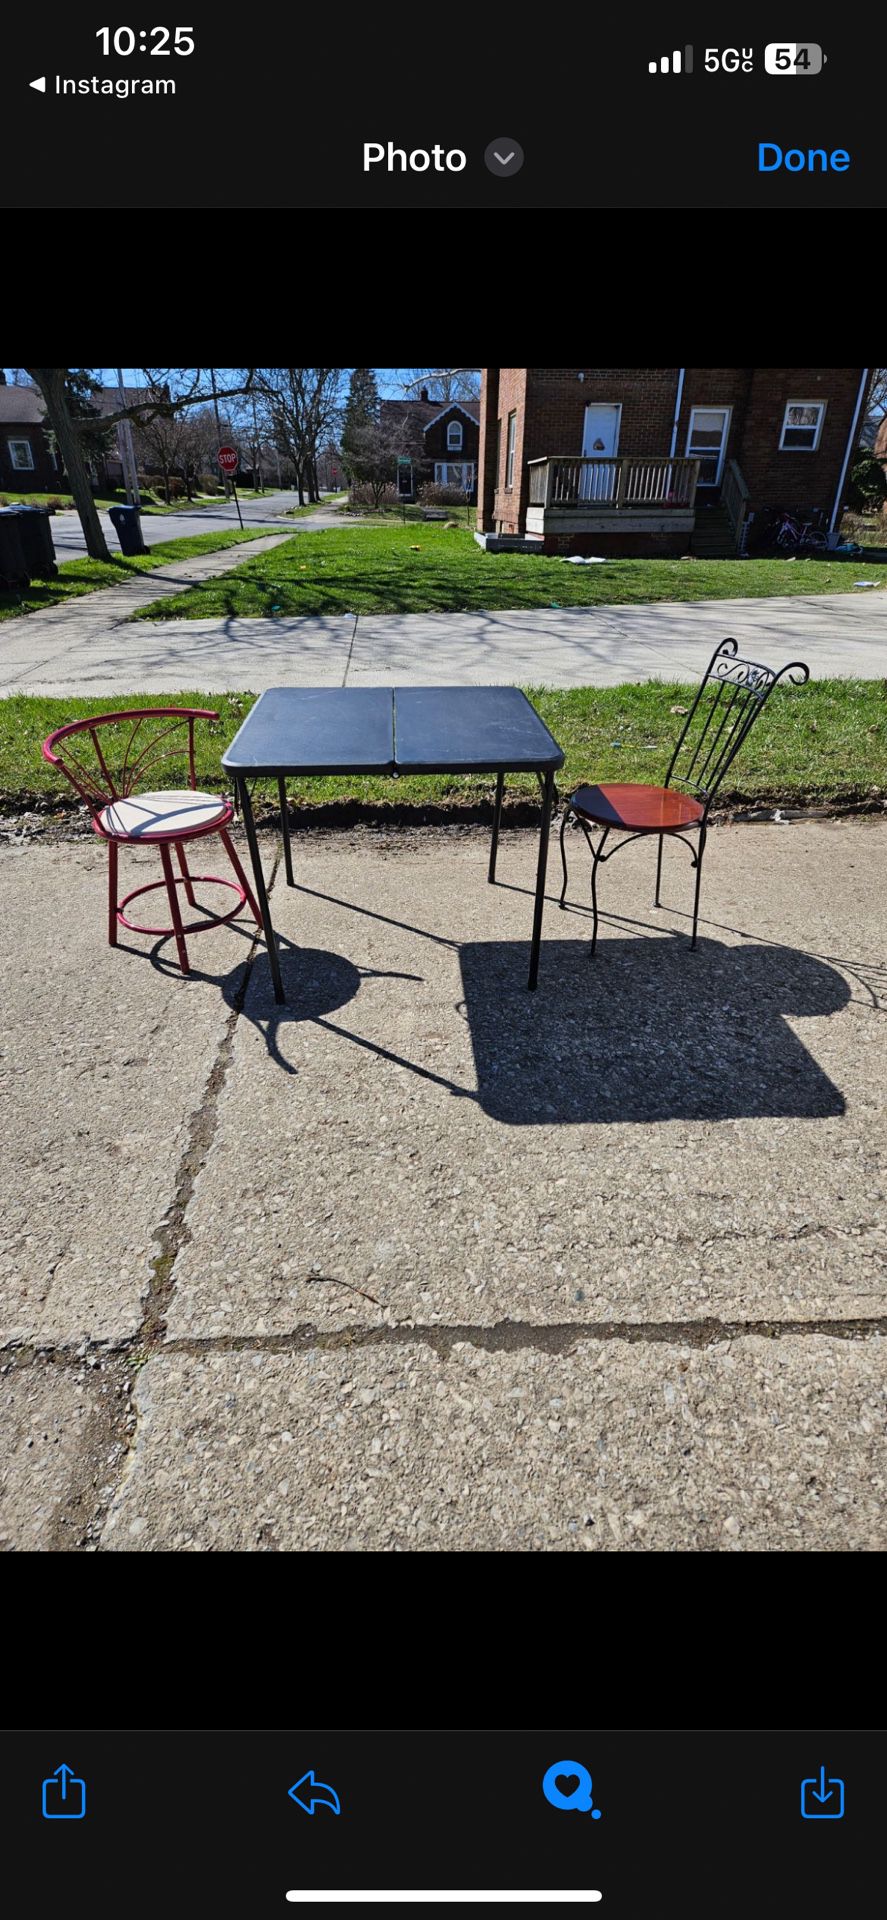 Card or Family Game Table With chairs 